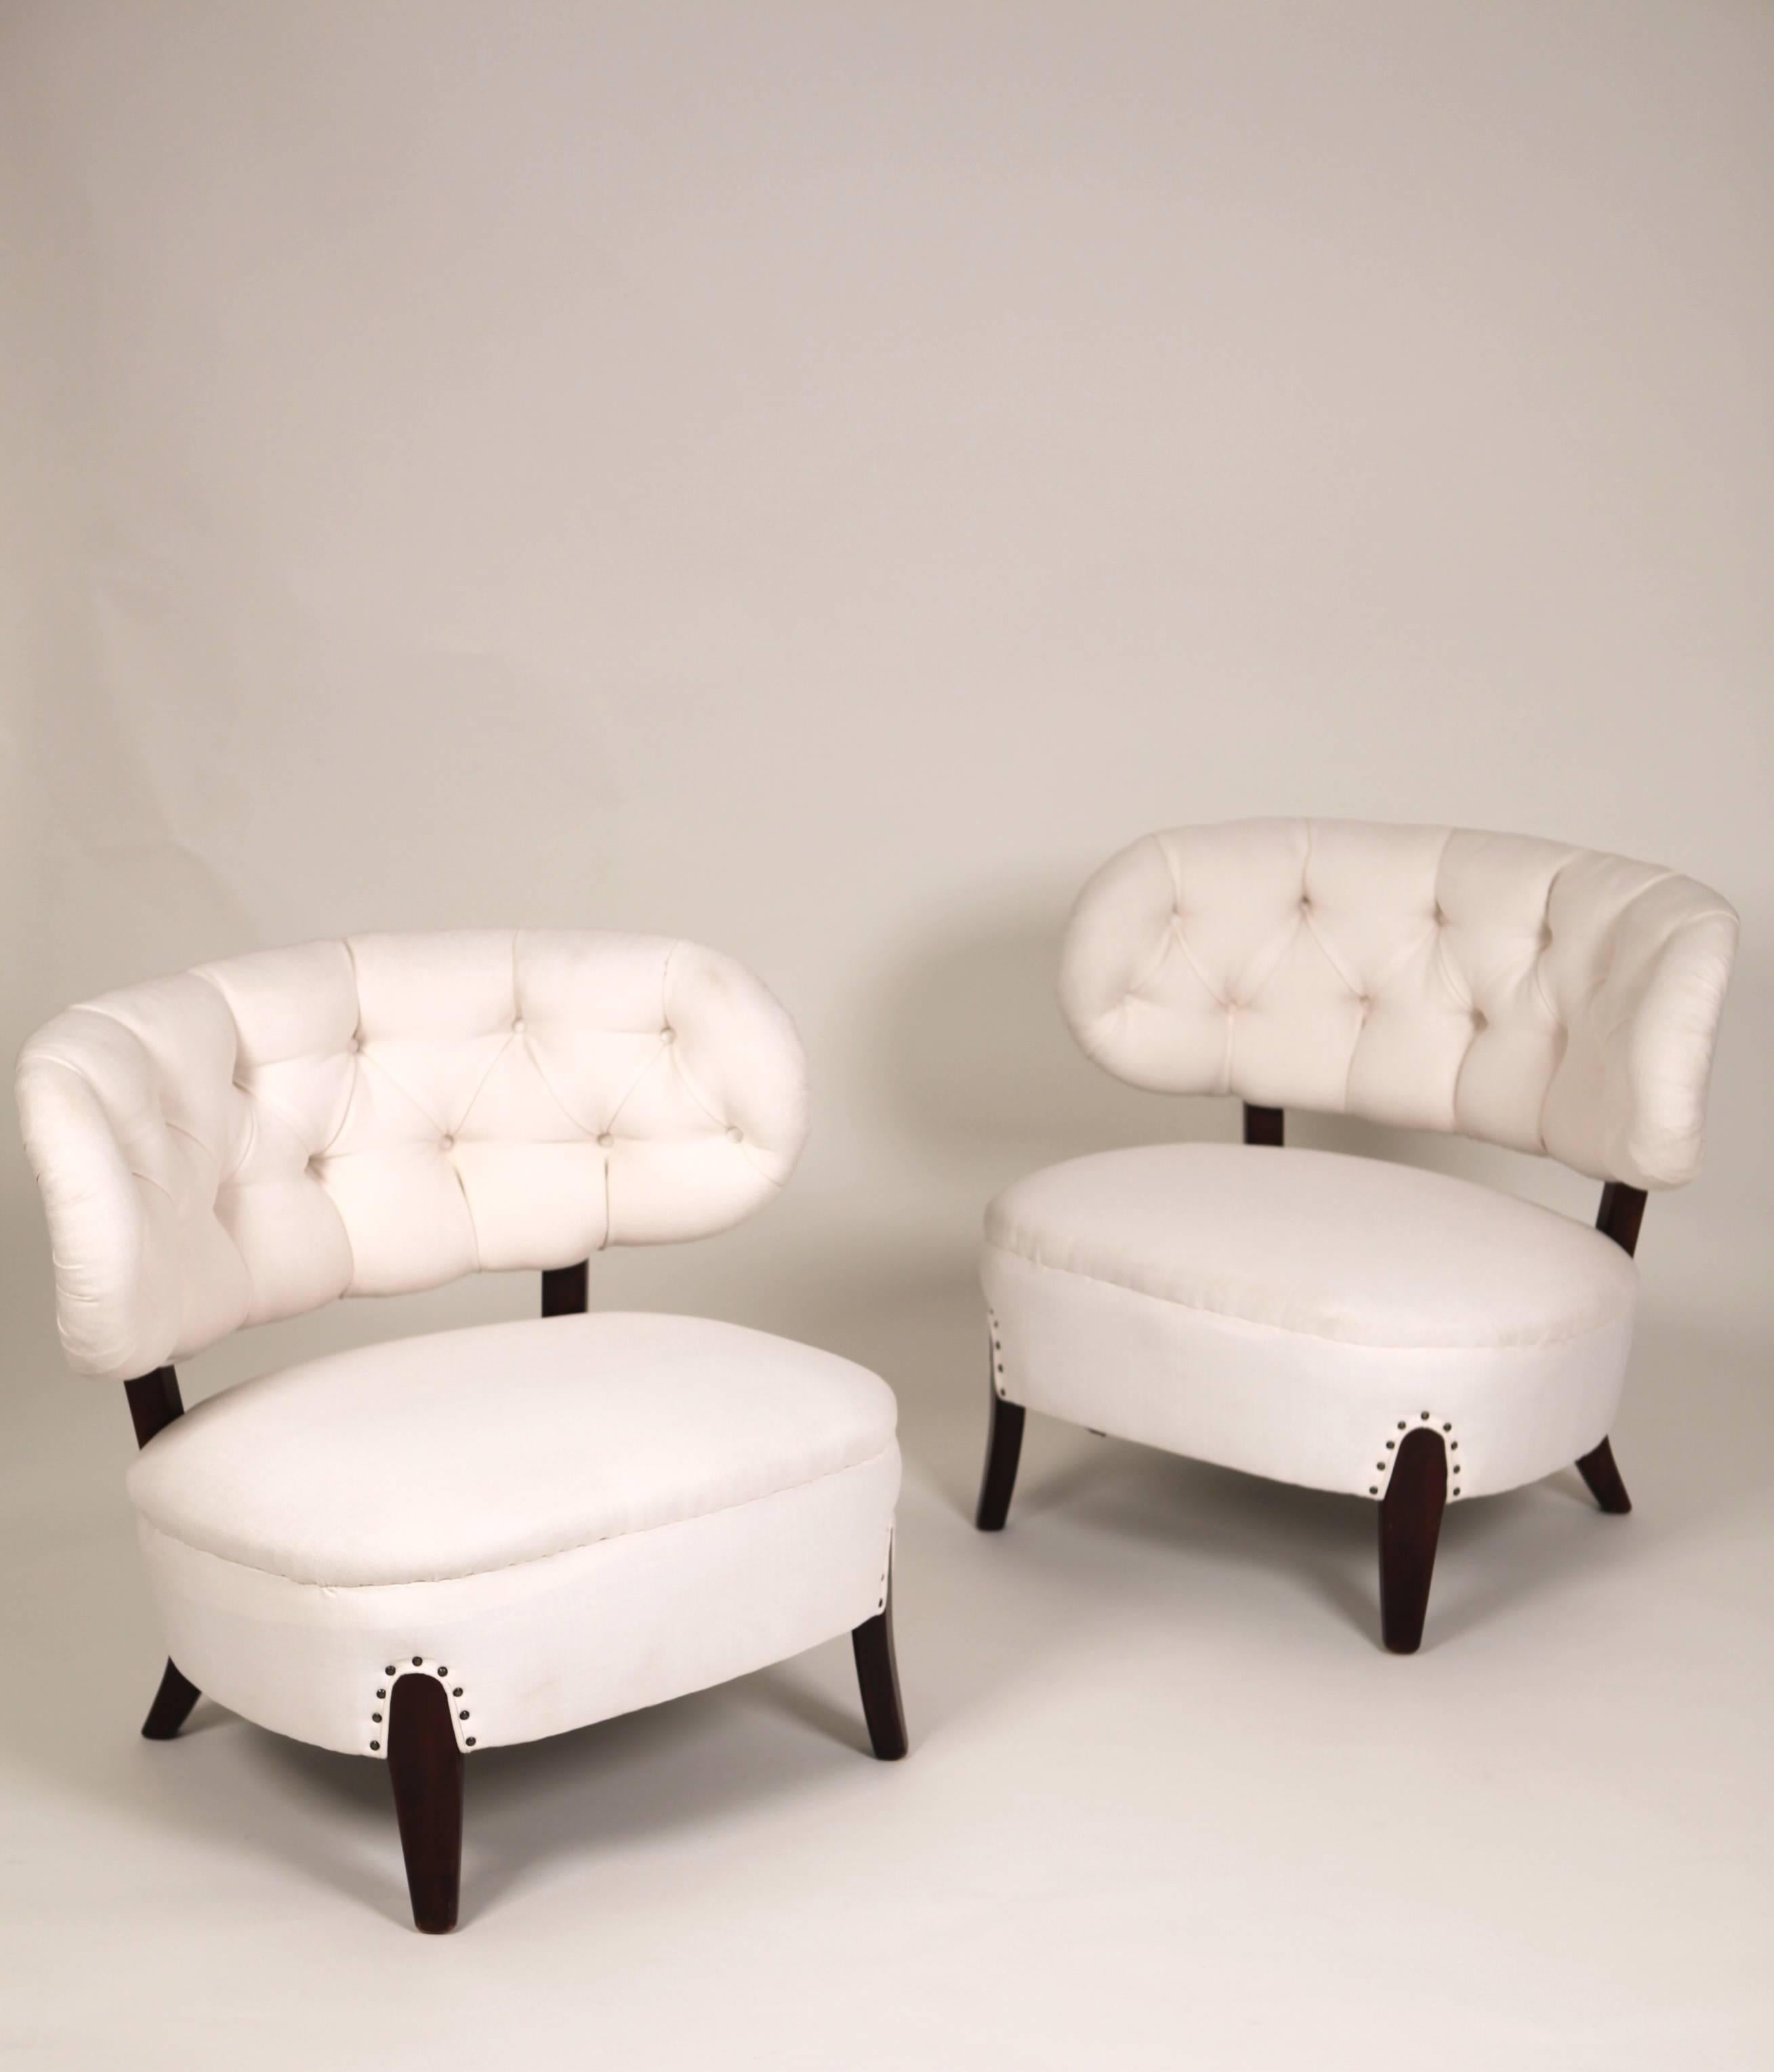 Mid-20th Century Otto Schulz Cocktail Chairs, Sweden, 1940s